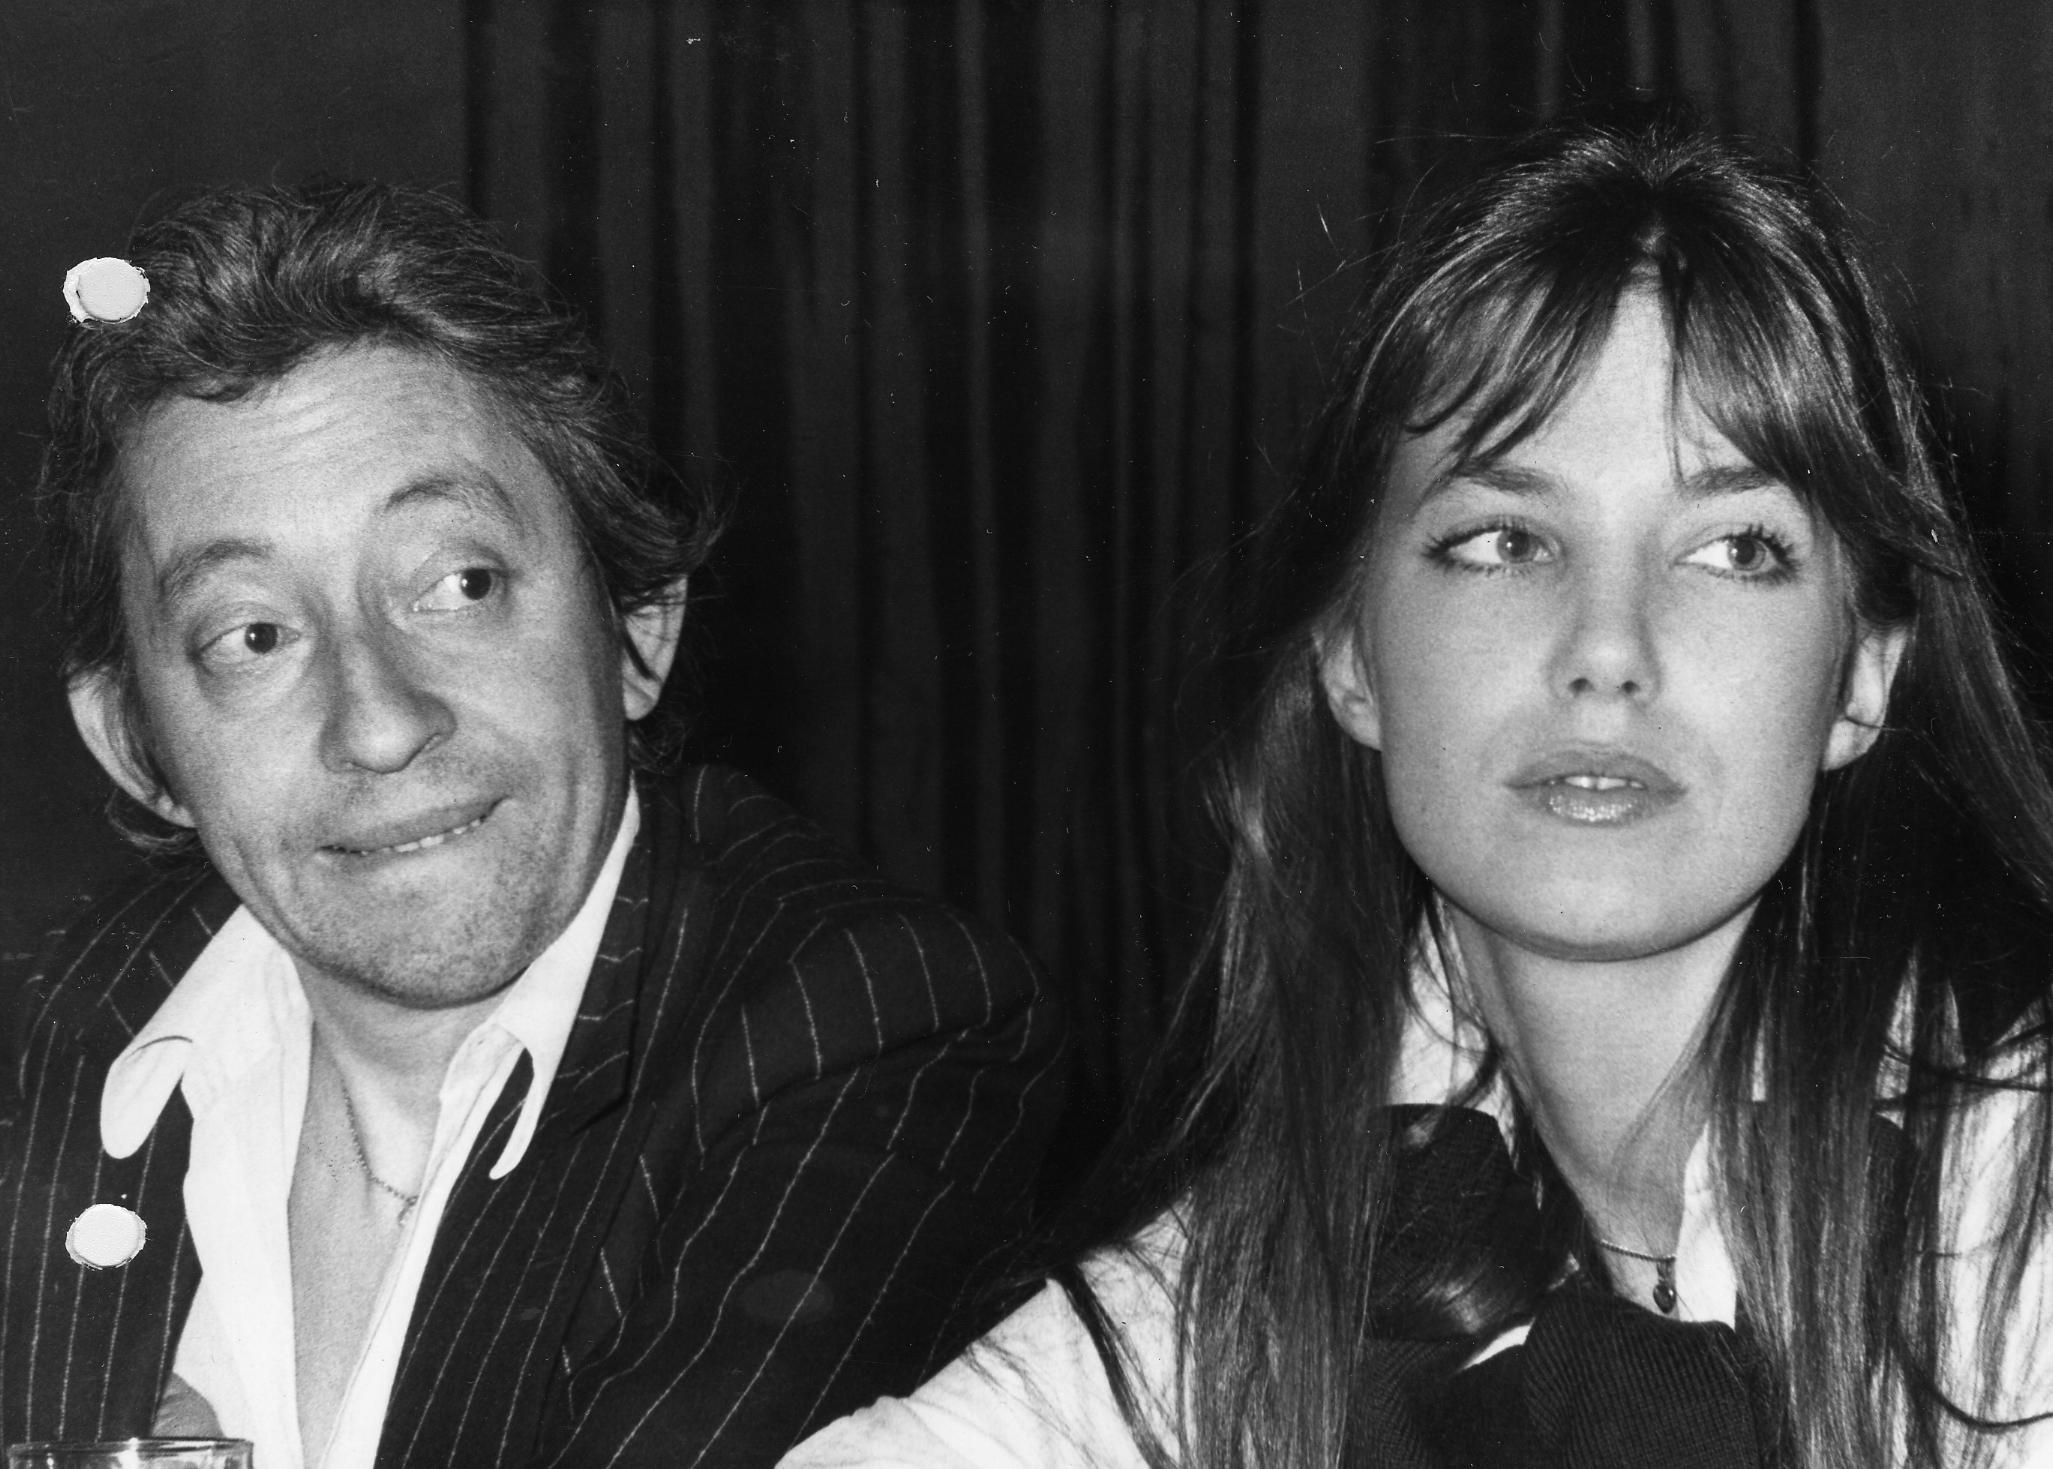 Singer, actress and Gainsbourg's muse: Jane Birkin died at age 76